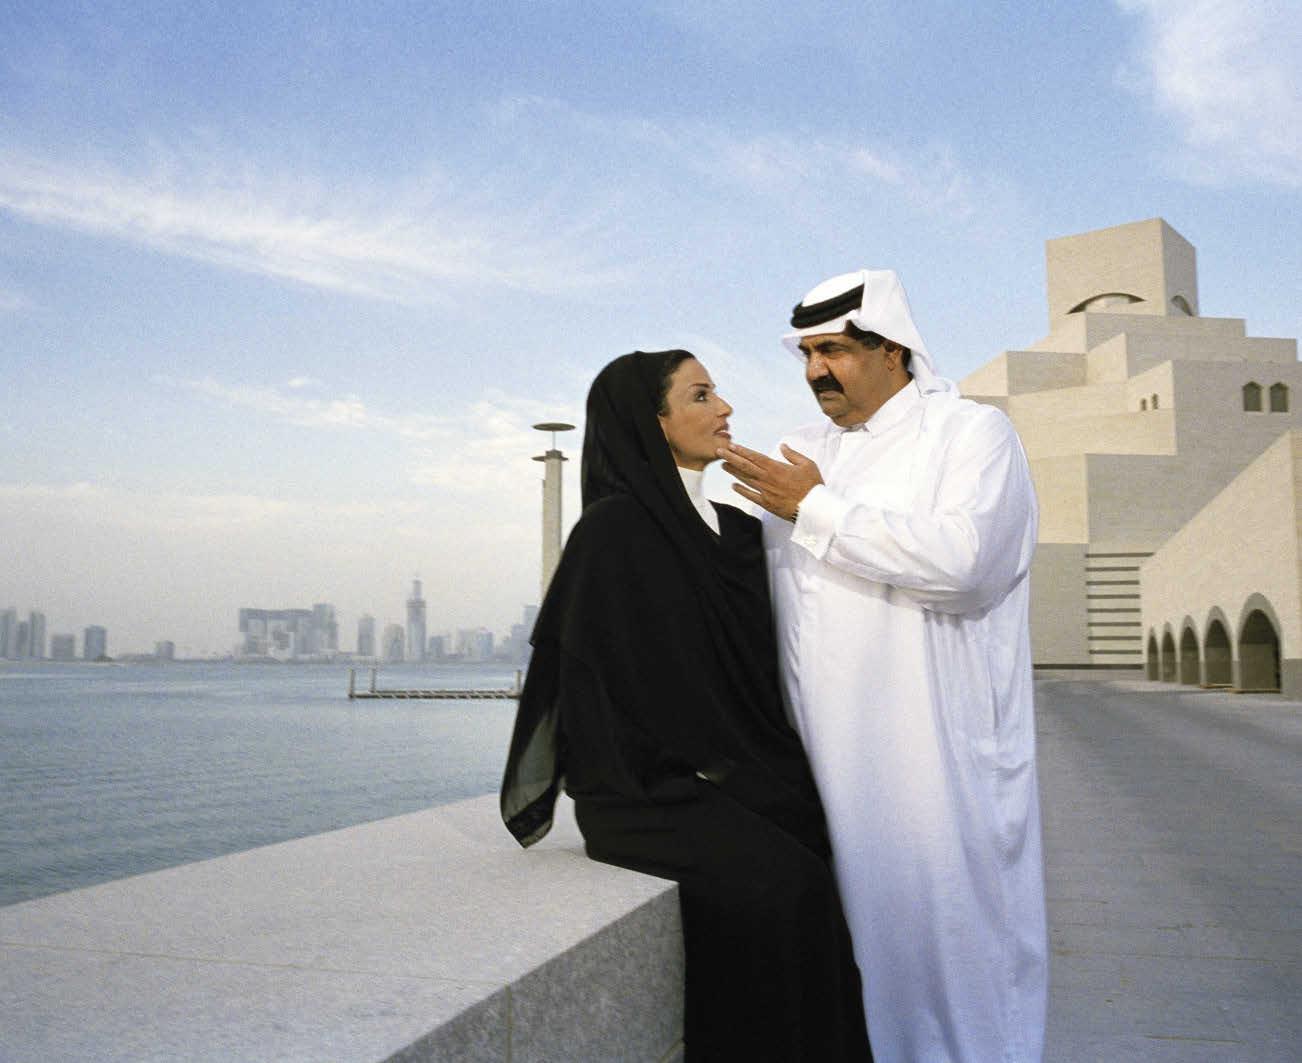 The Father Emir, Hamad ben Khalifa Al Thani, and his second wife, Moza bint Nasser Al Missned, in May 2008, in front of the Museum of Islamic Art. TOM STODDART/HULTON ARCHIVE/GETTY IMAGES